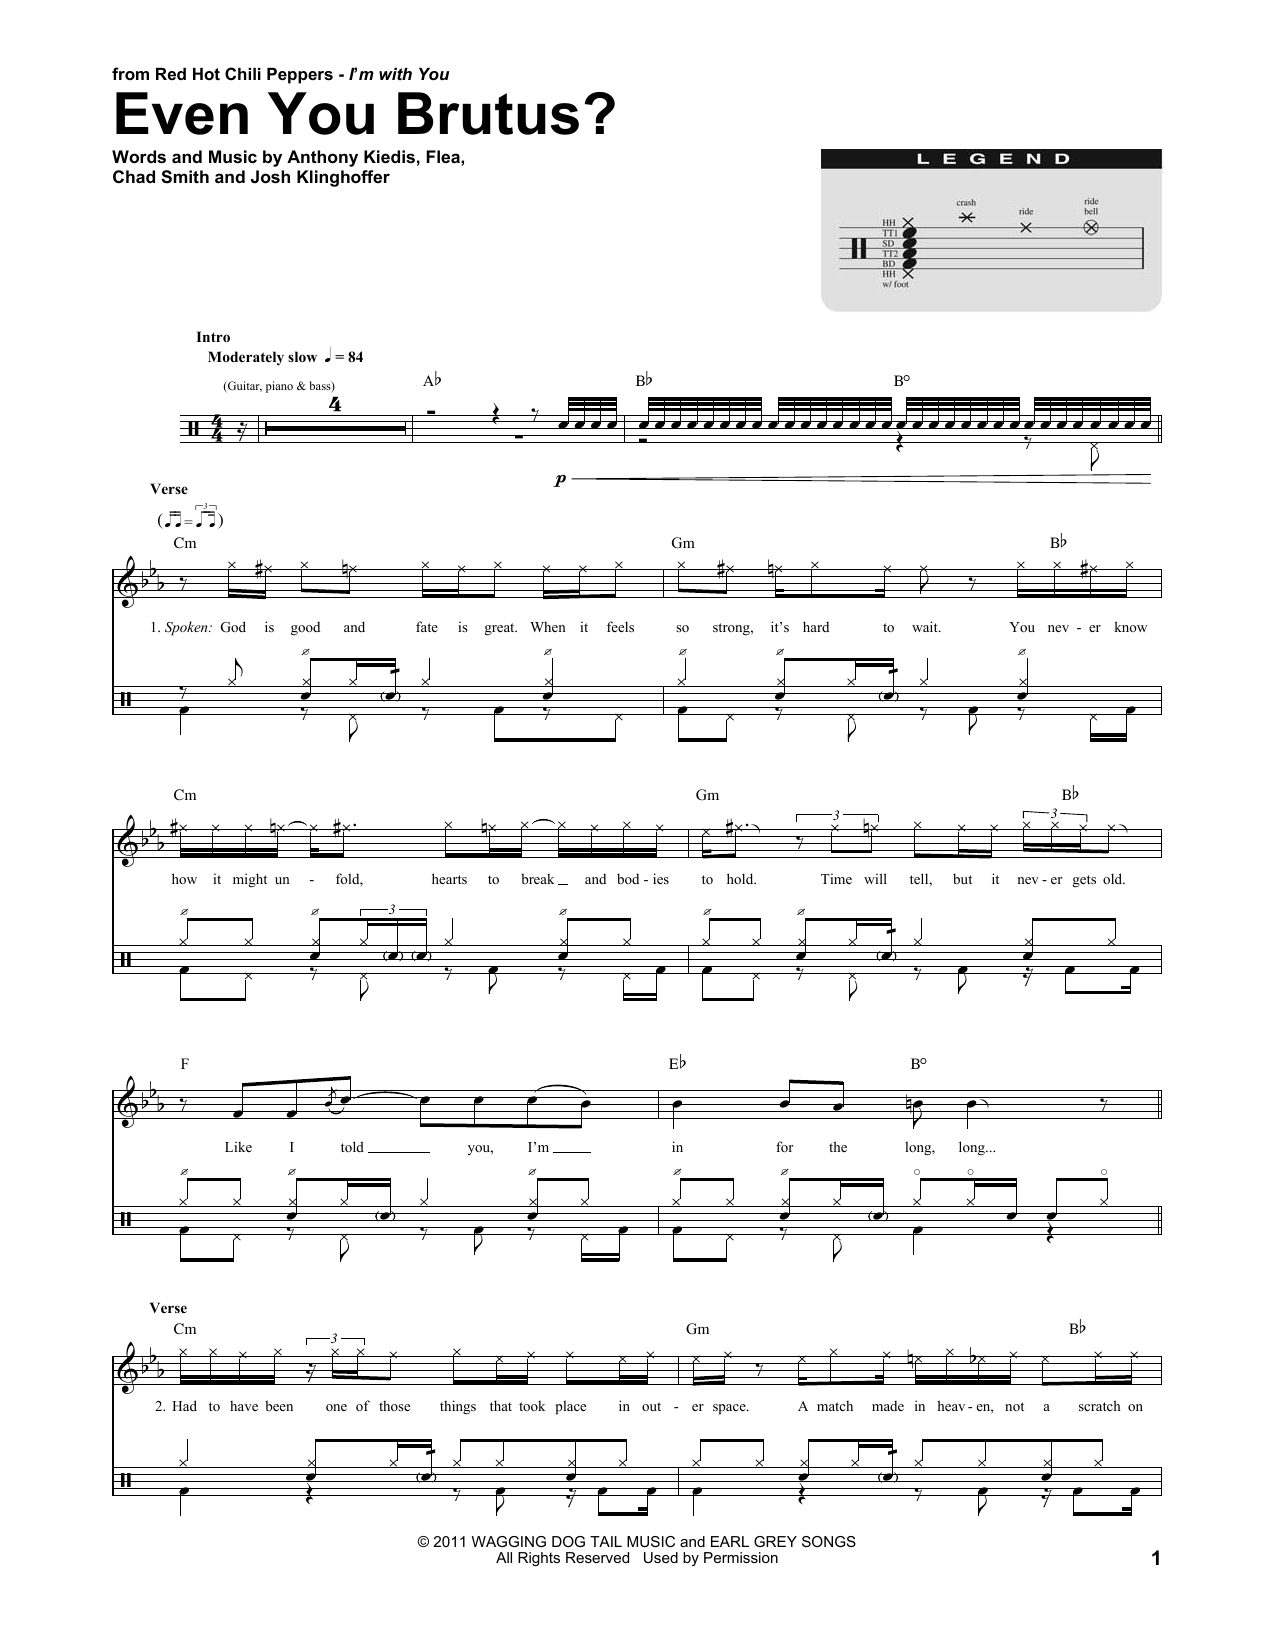 Download Red Hot Chili Peppers Even You Brutus? Sheet Music